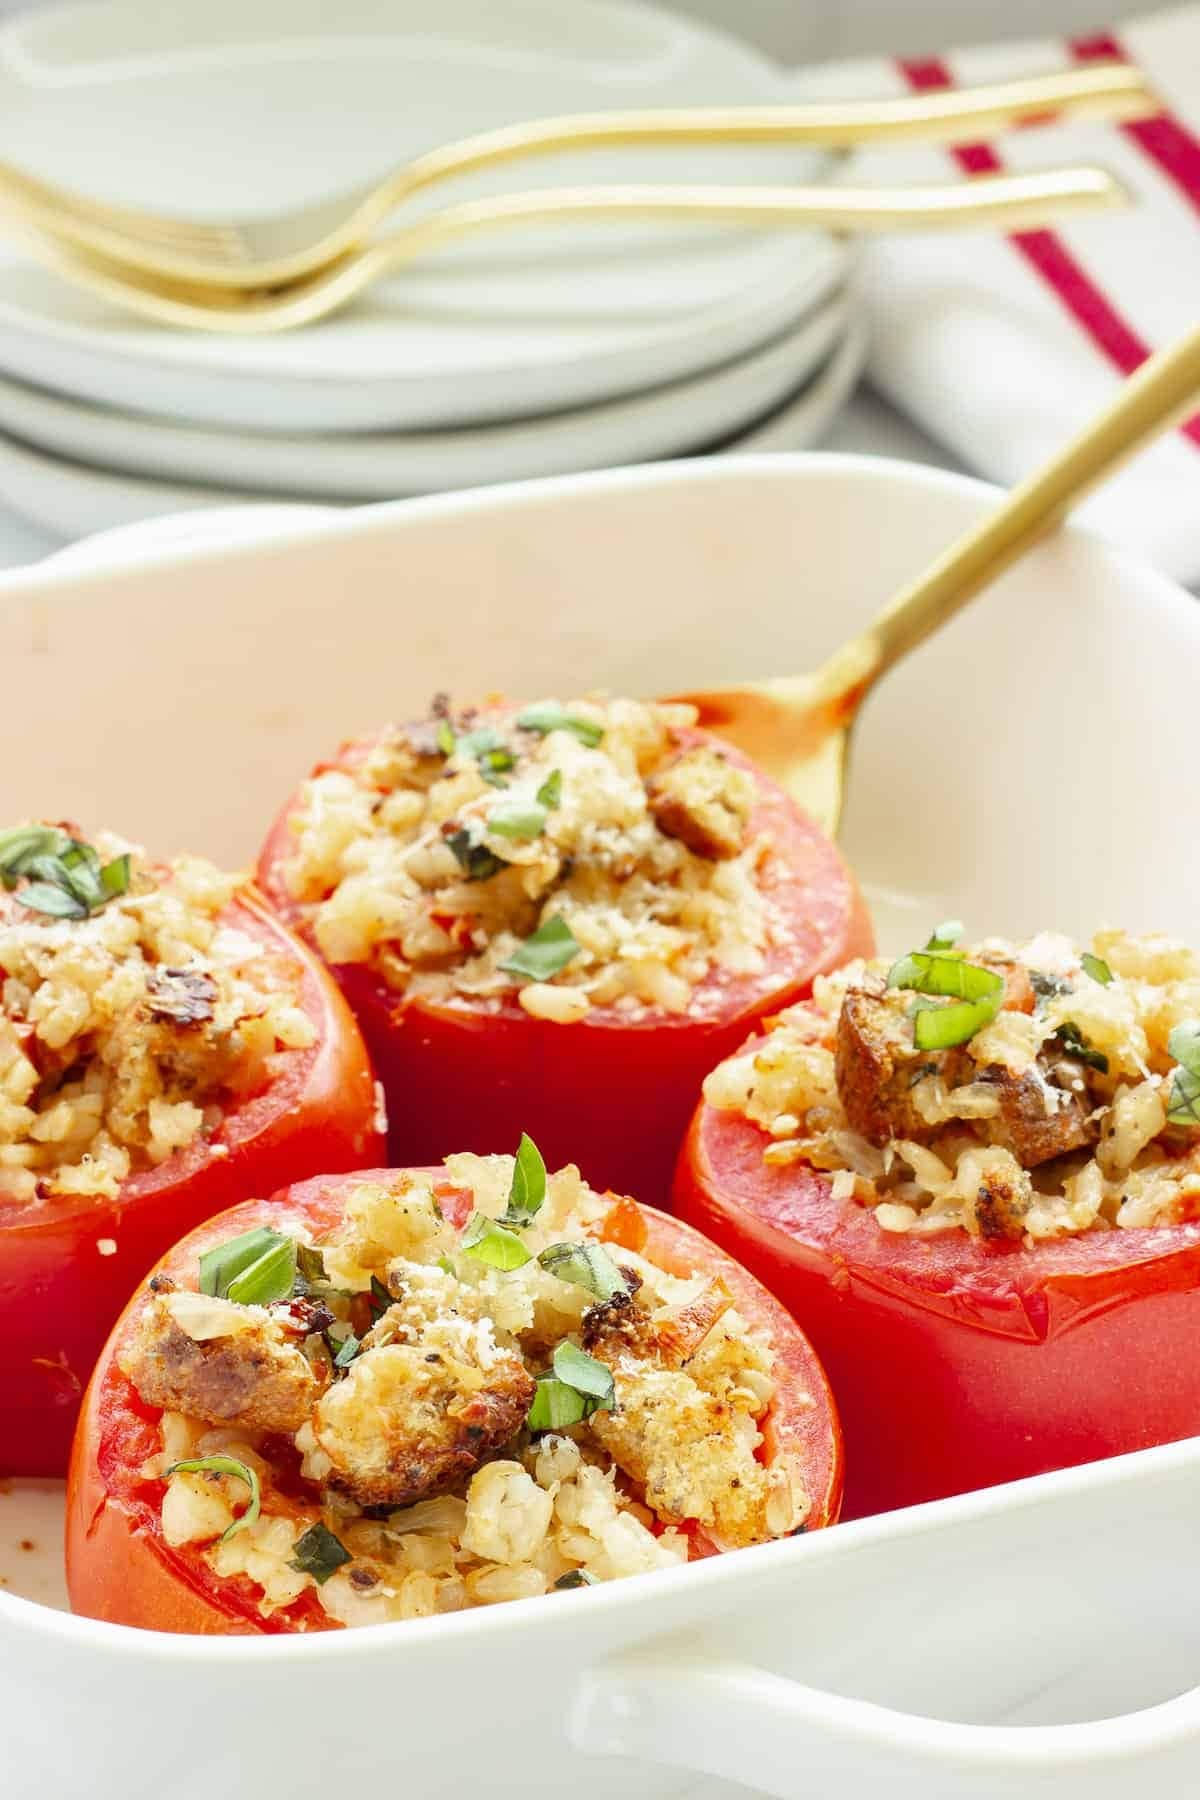 Baked tomatoes stuffed with  rice, herb, and cheese filling.